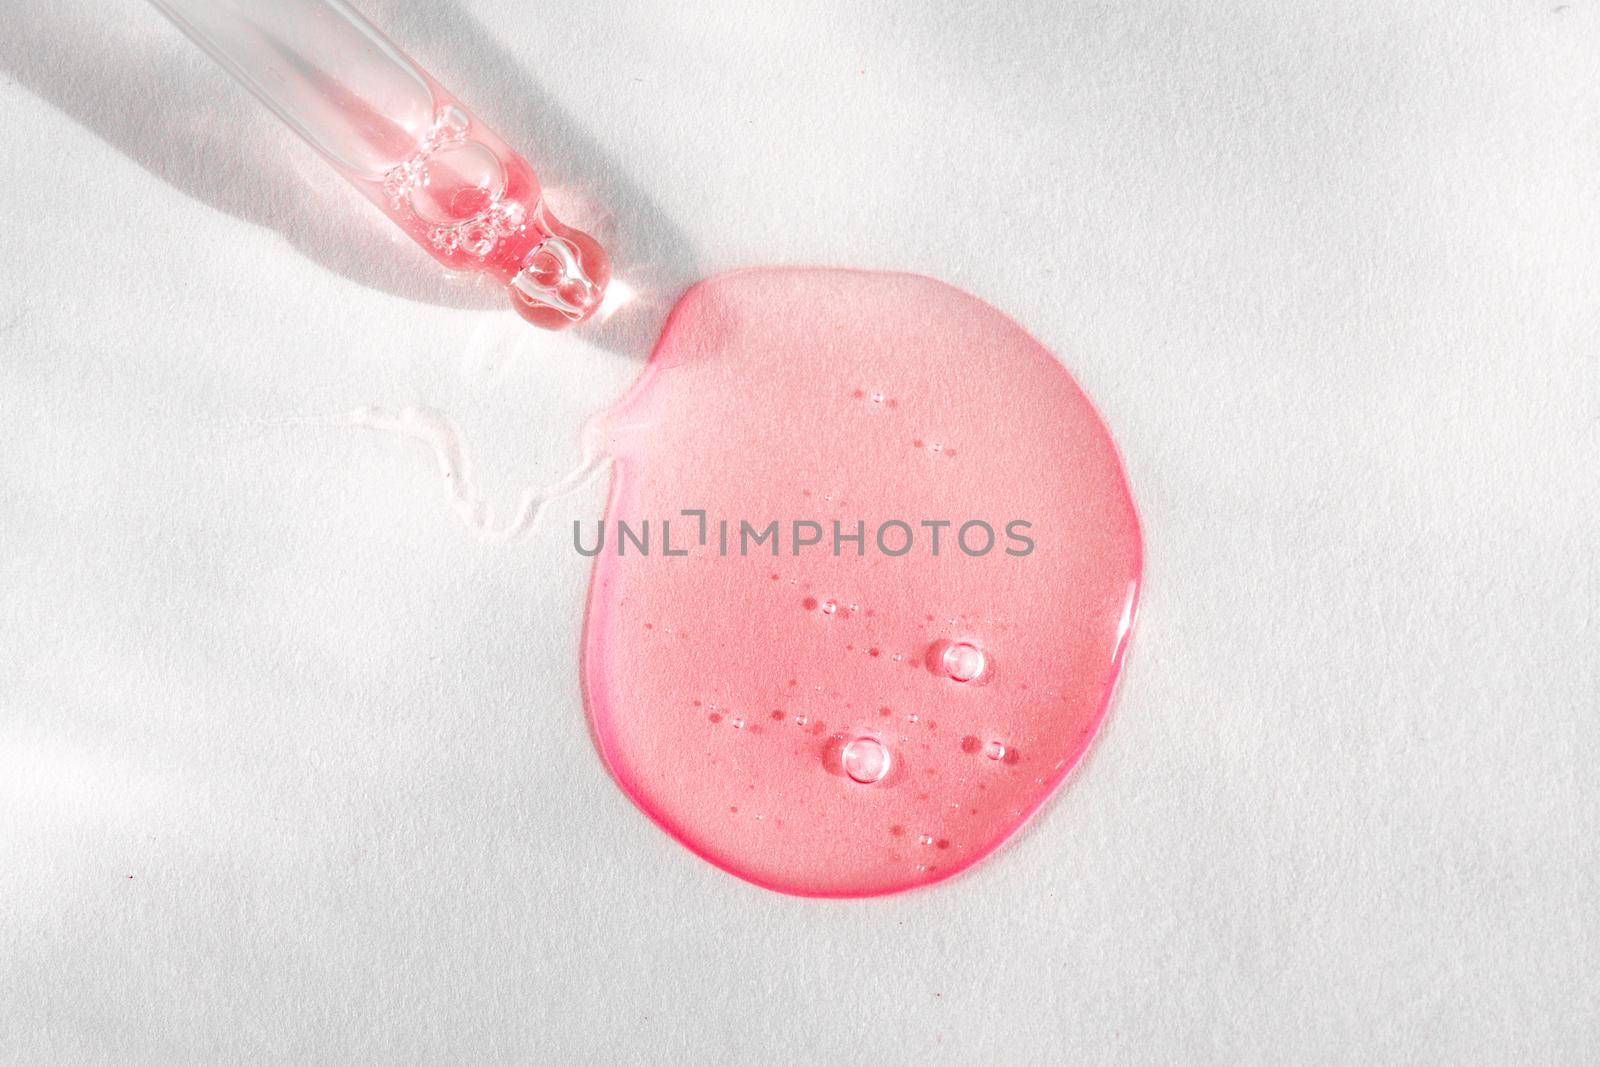 Pipette with pink fluid hyaluronic acid on white background. Cosmetics and healthcare concept. Dose of serum or retinol with air bubbles. Flatlay. Luxury gel or beauty product presentation in macro